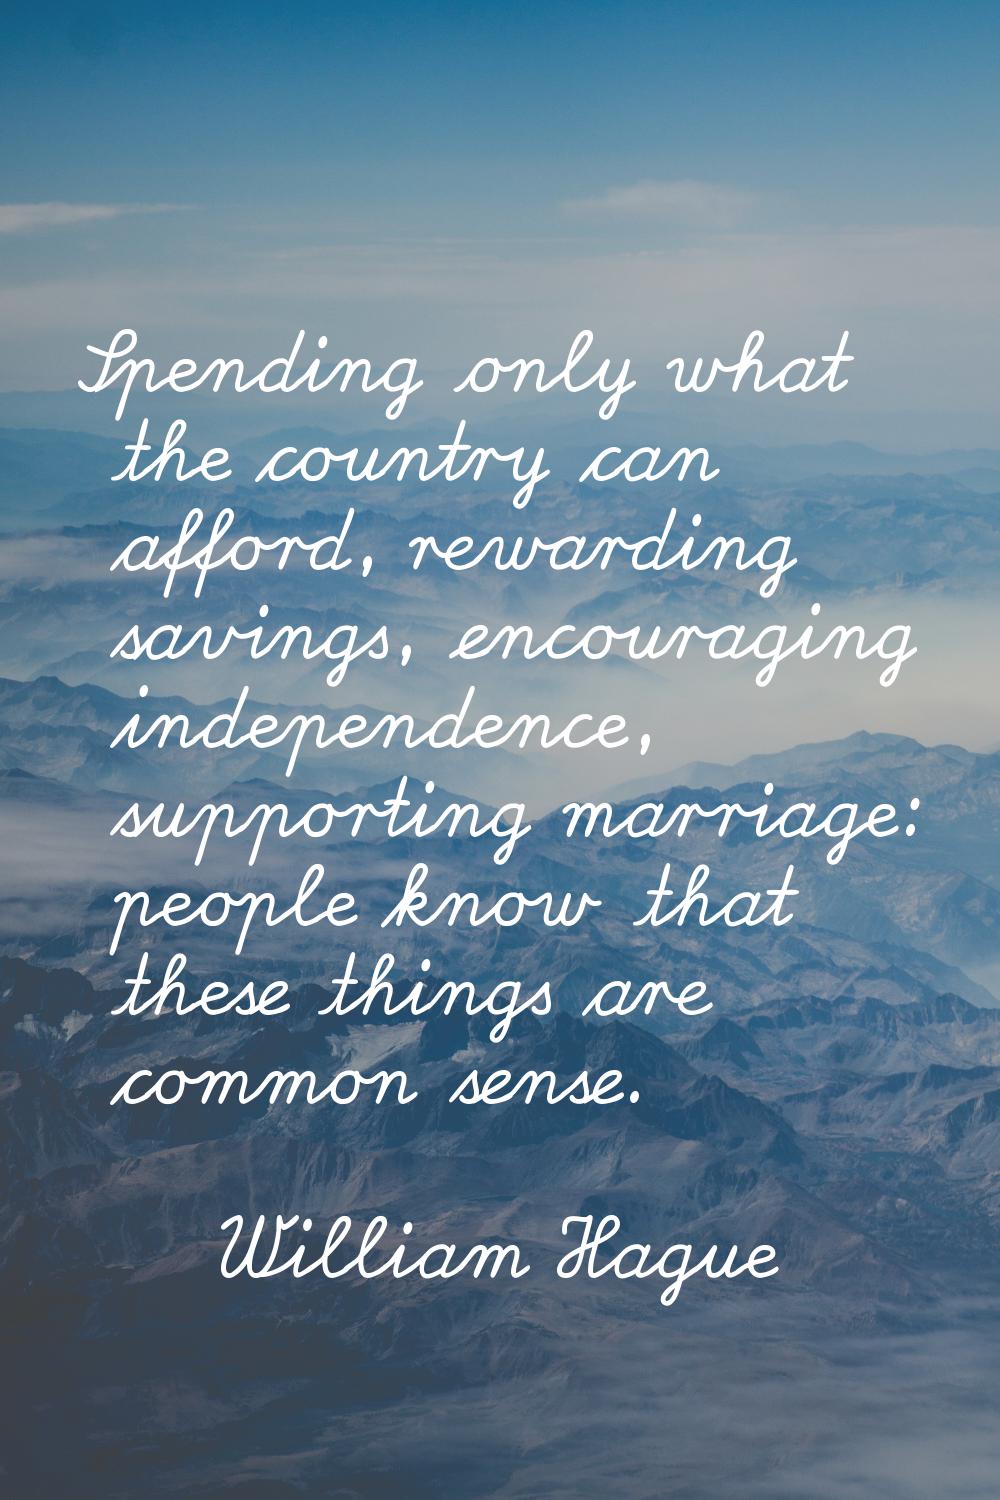 Spending only what the country can afford, rewarding savings, encouraging independence, supporting 